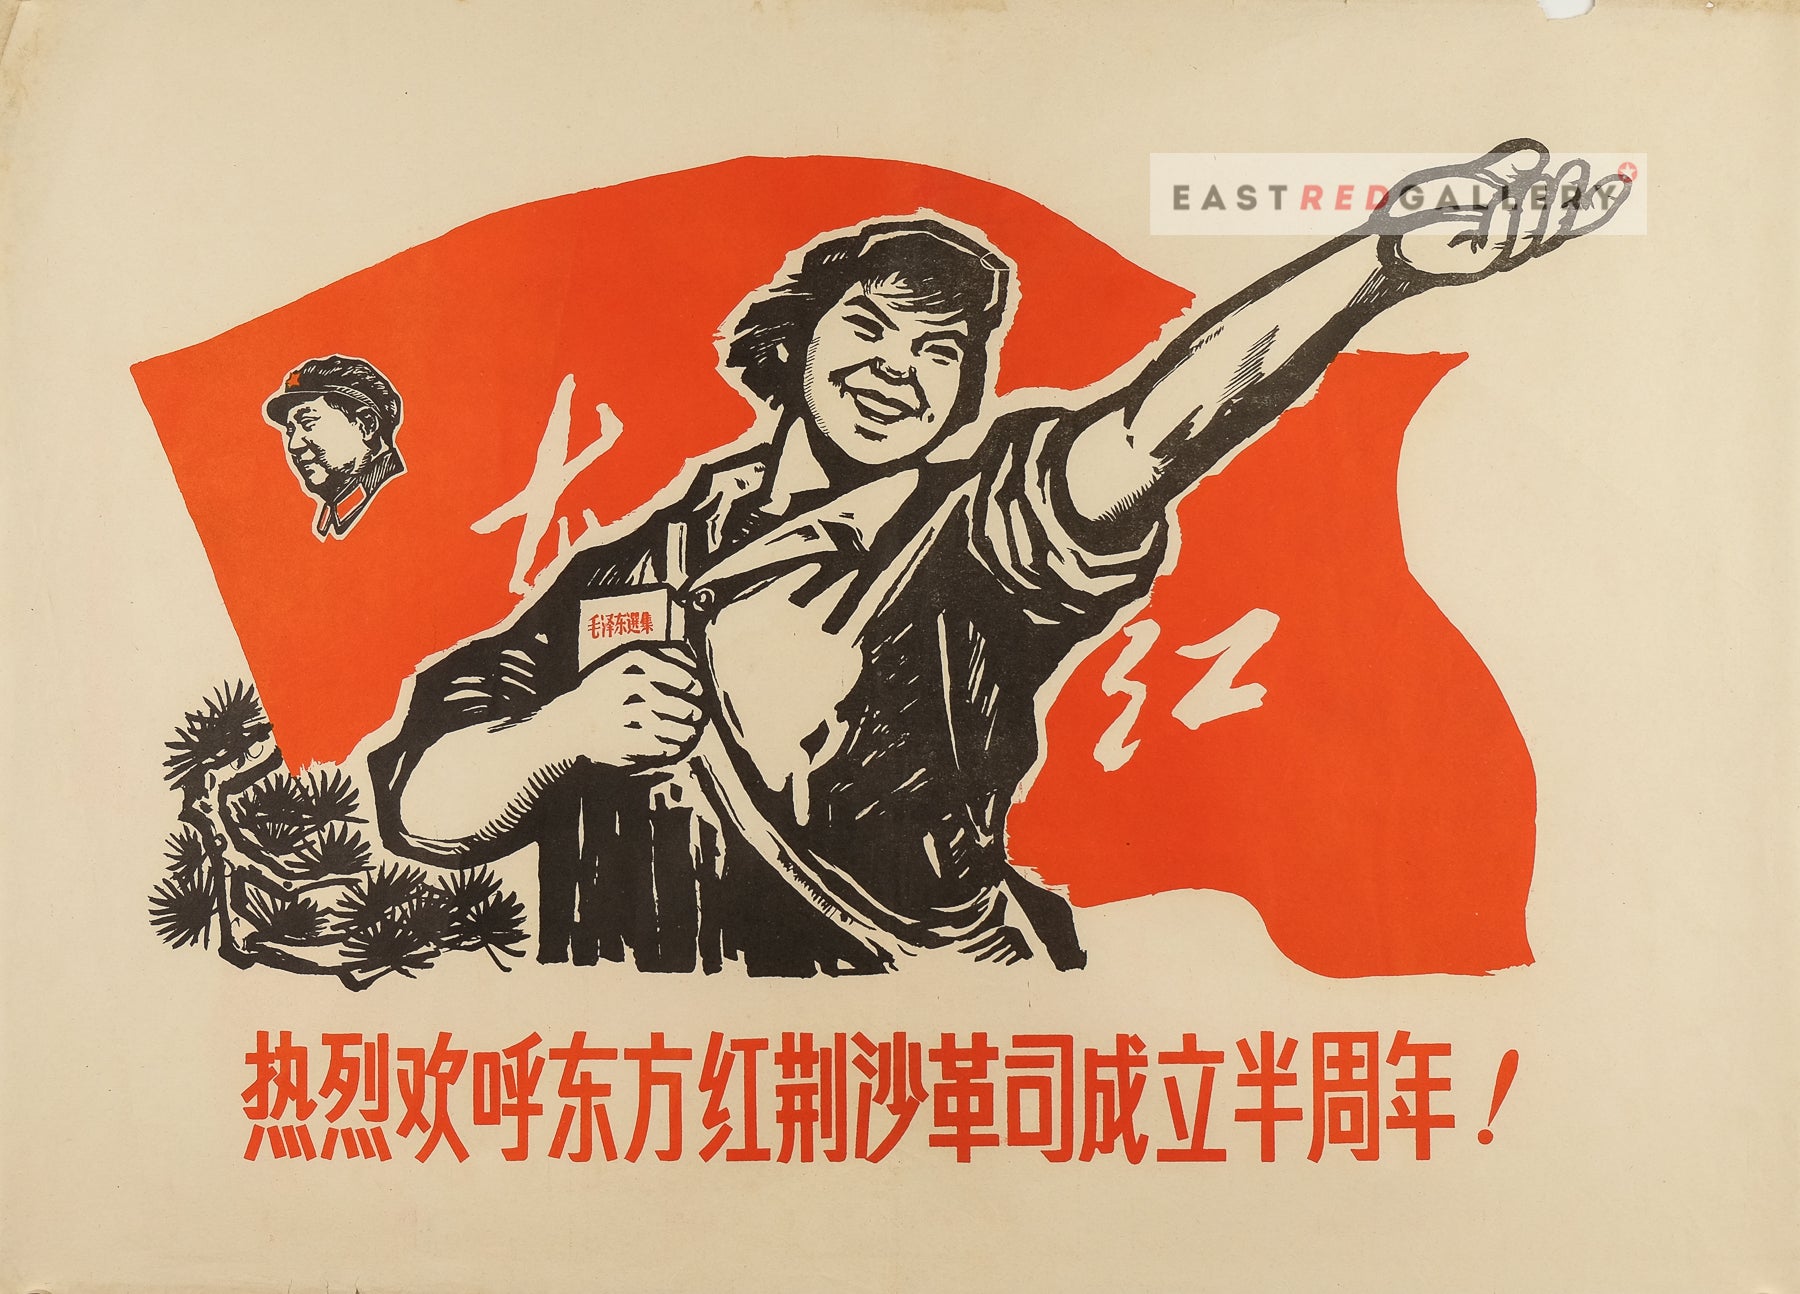 image of 1968 Chinese poster Warmly congratulate East is Red Jingsha Revolutionary Committee on its 6 month anniversary!